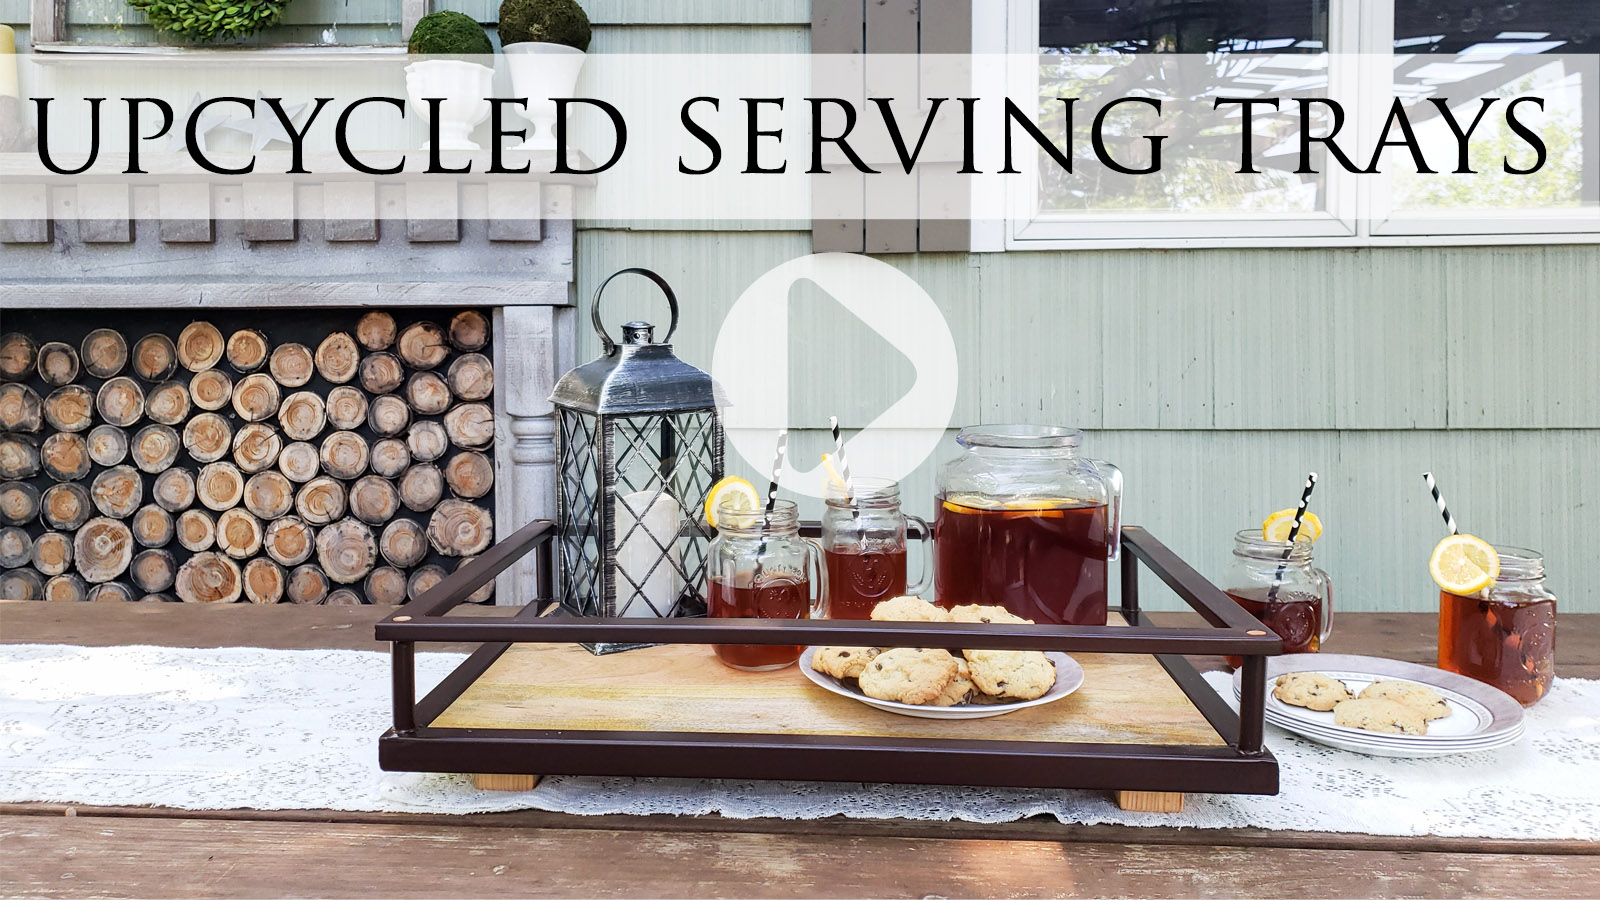 DIY Tutorial for Upcycled Serving Trays from Bar Cart by Prodigal Pieces | prodigalpieces.com